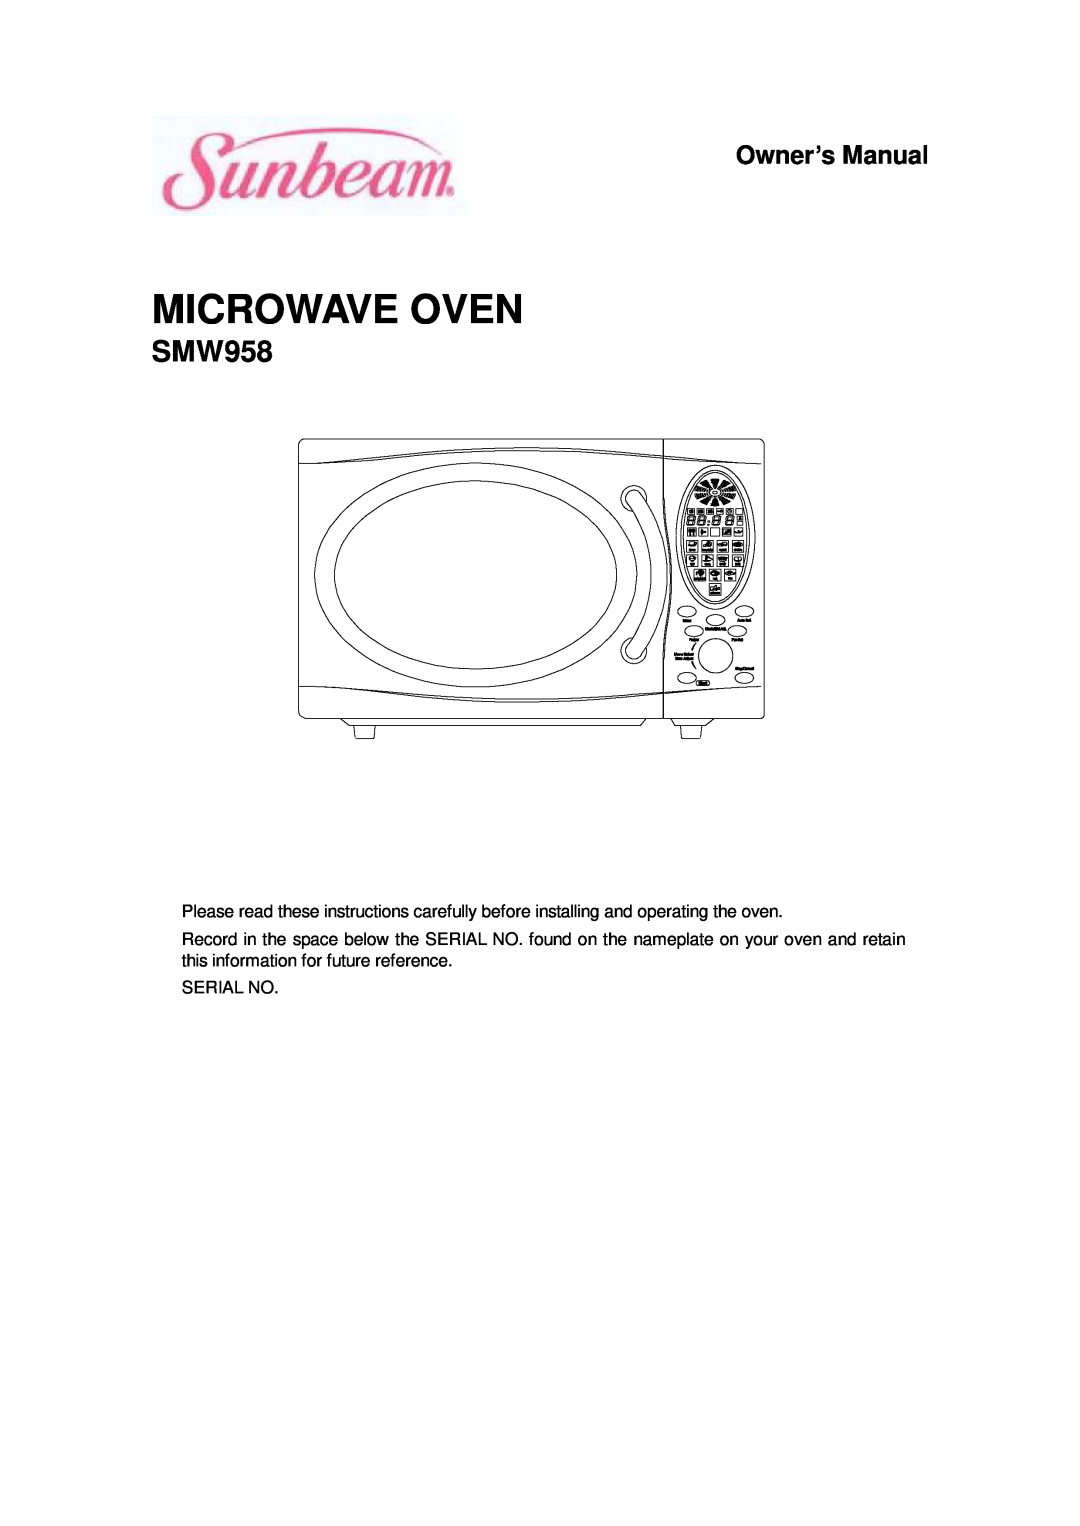 Sunbeam SMW958 owner manual Microwave Oven 